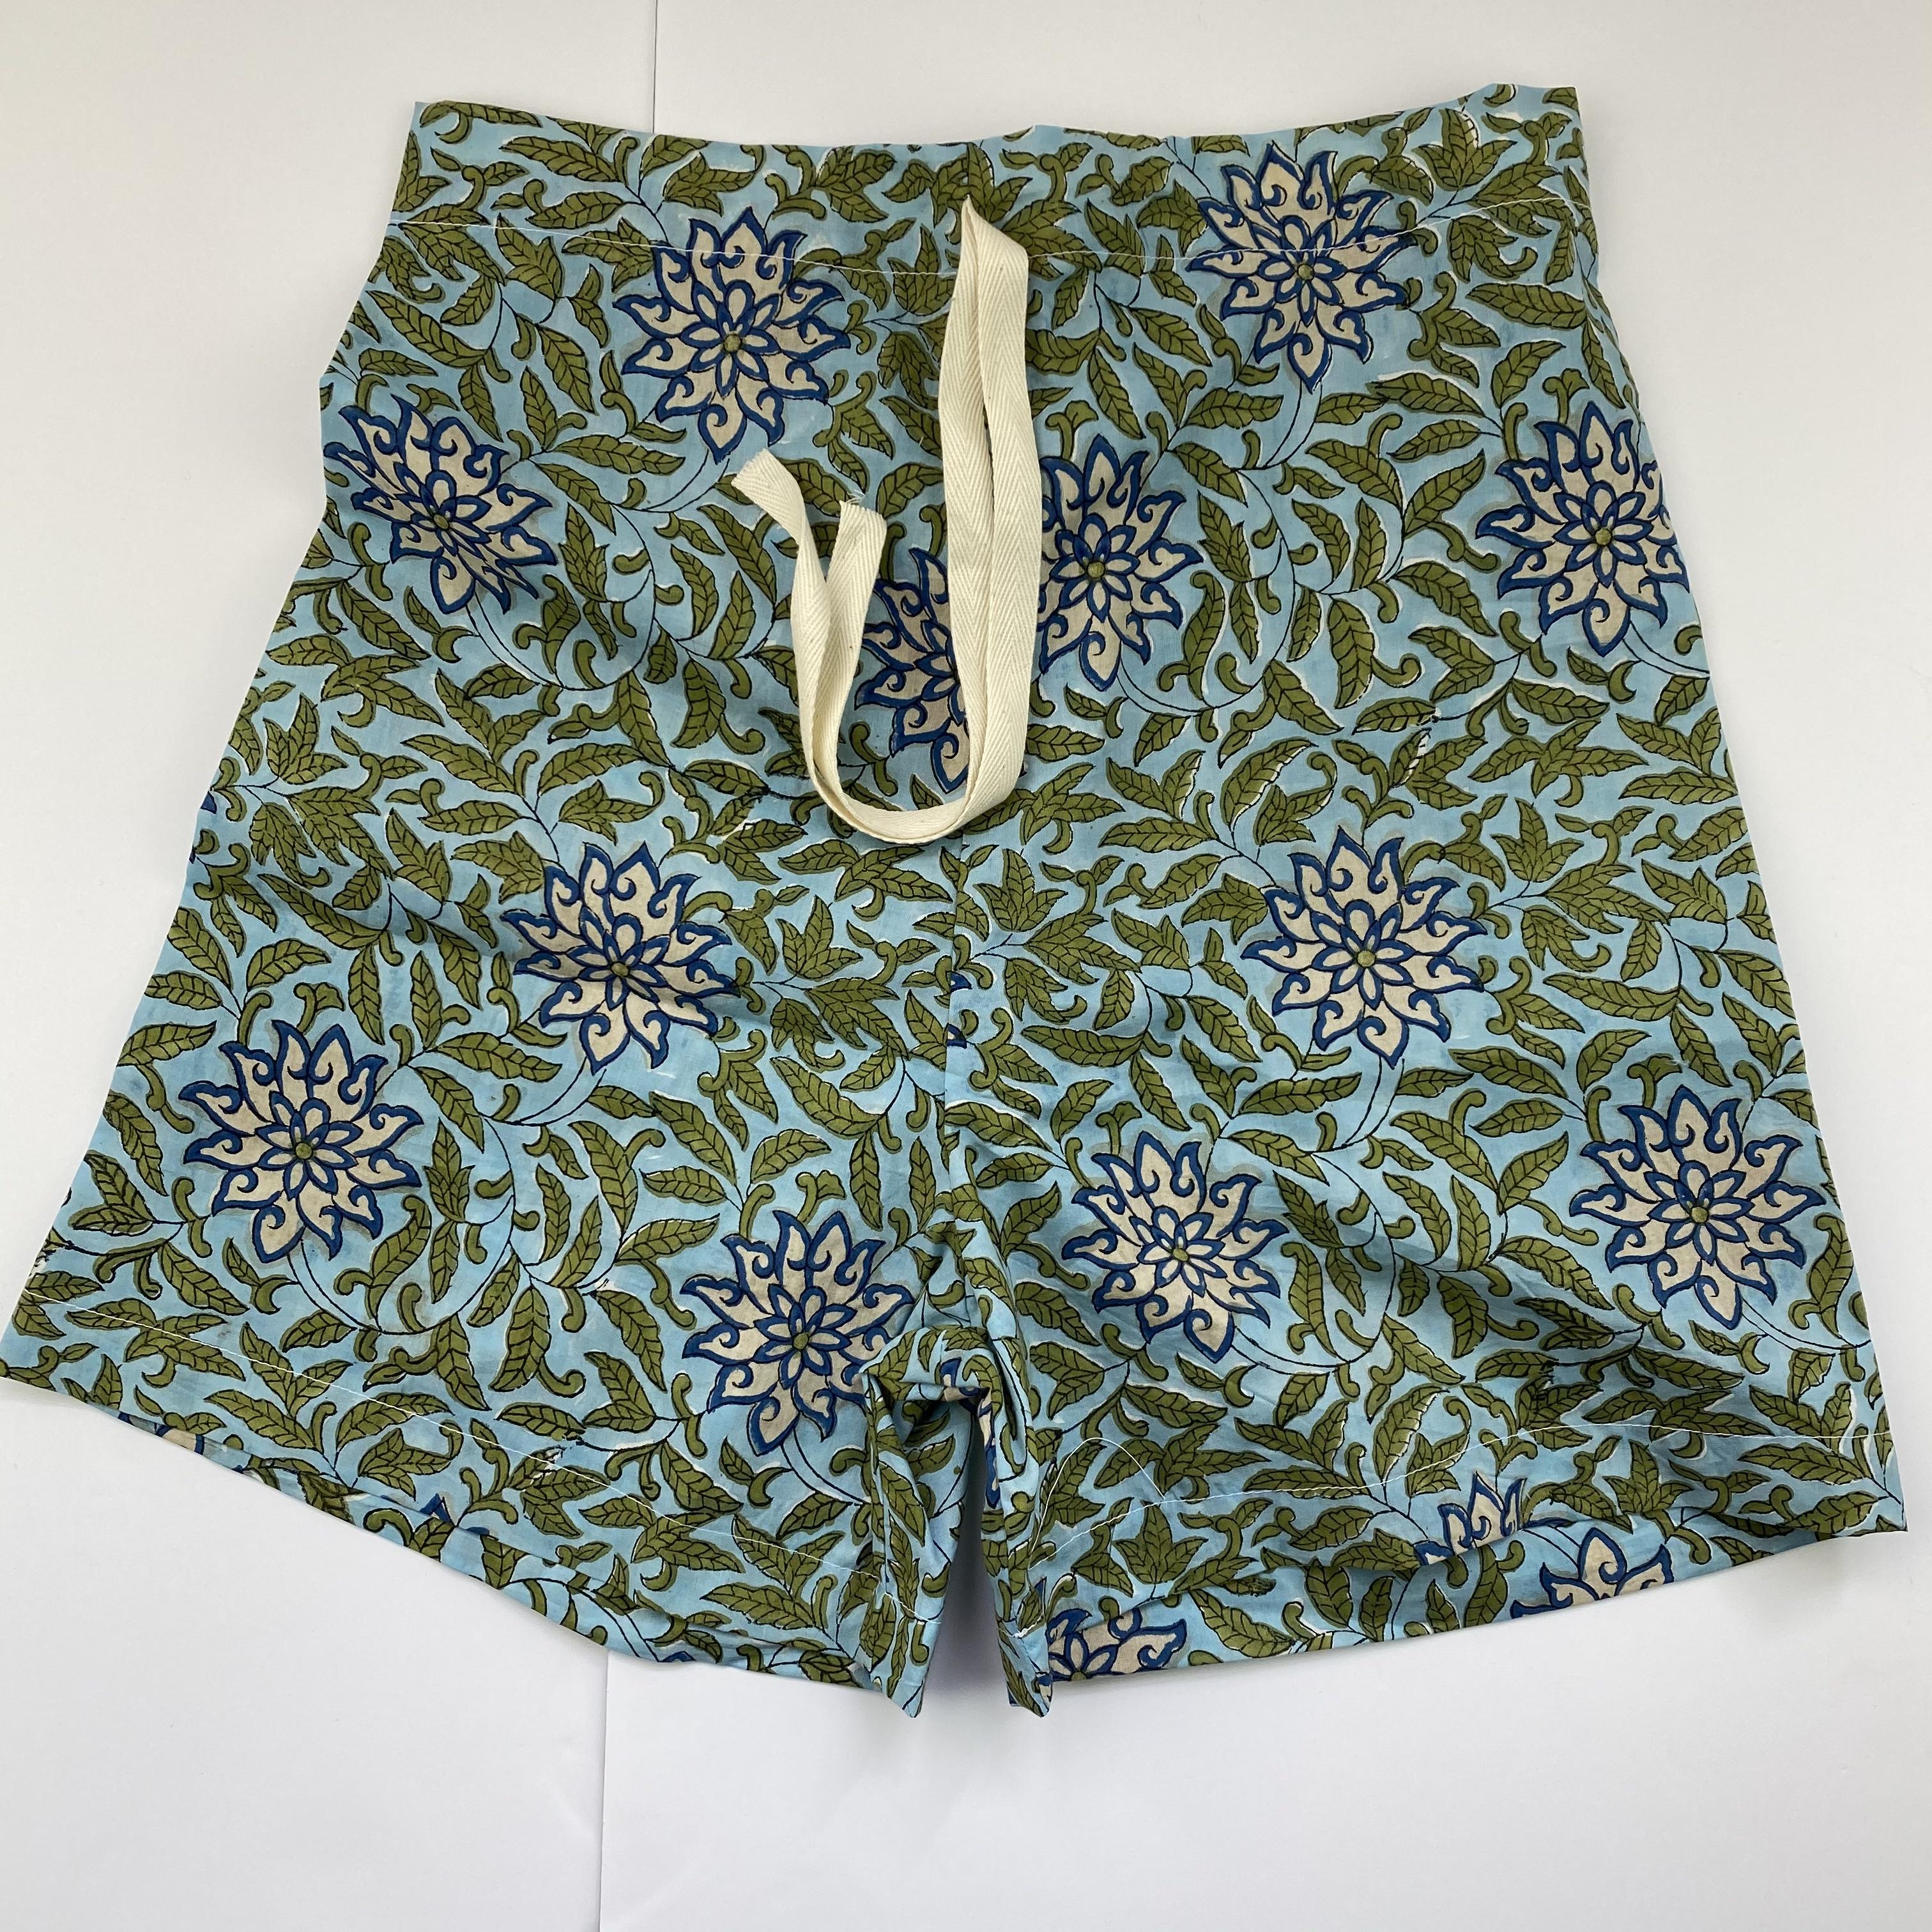 shorts in turquoise starflower printed cotton fabric